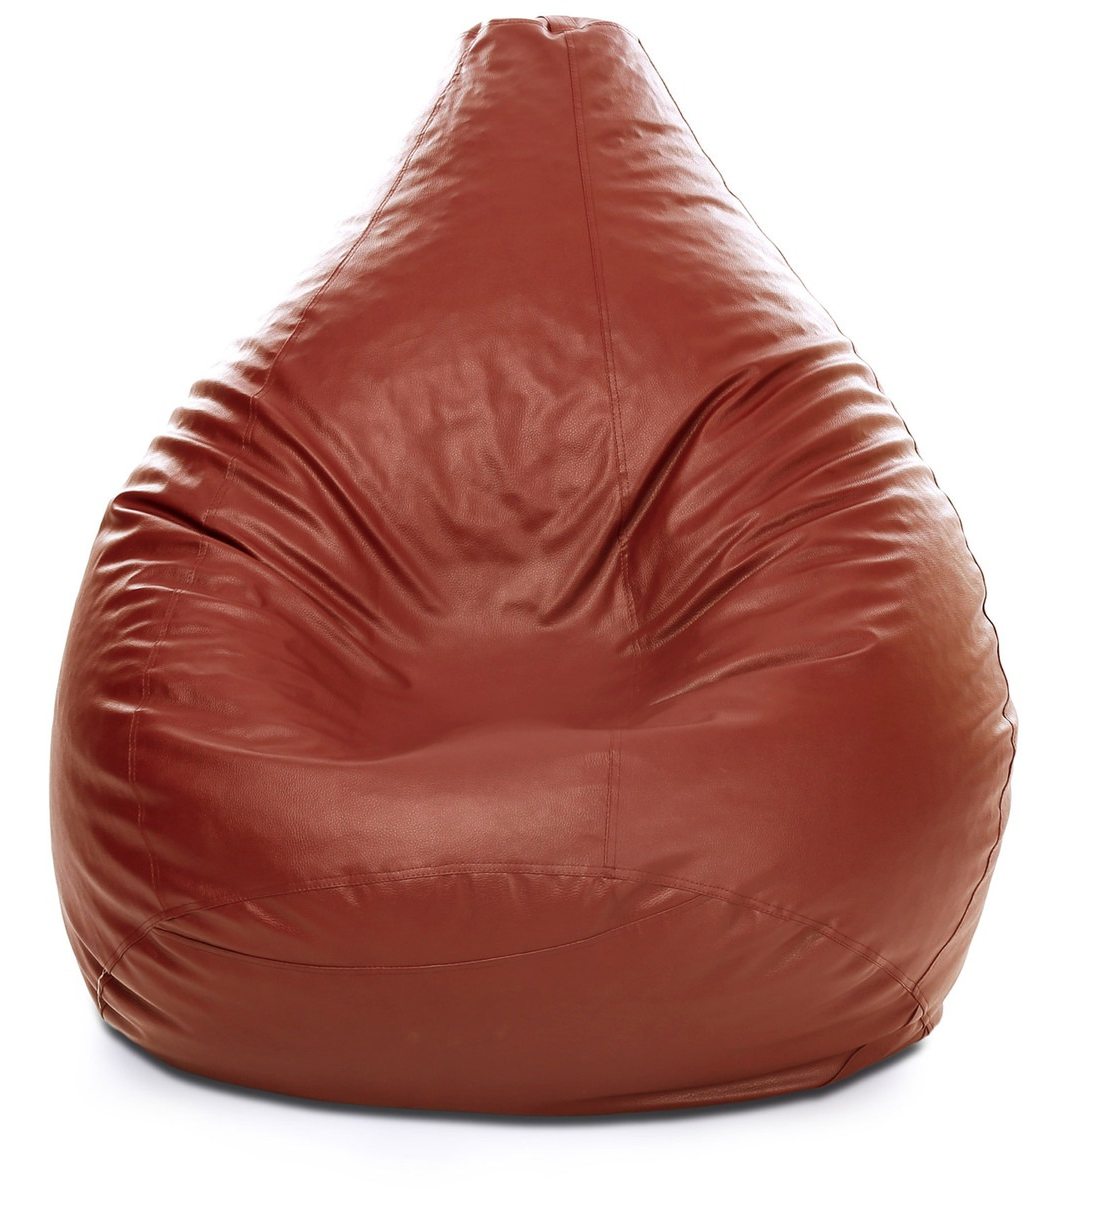 HDC Super Lama Leather Bean Bag Cover Without Beans (TAN) - HDC.IN